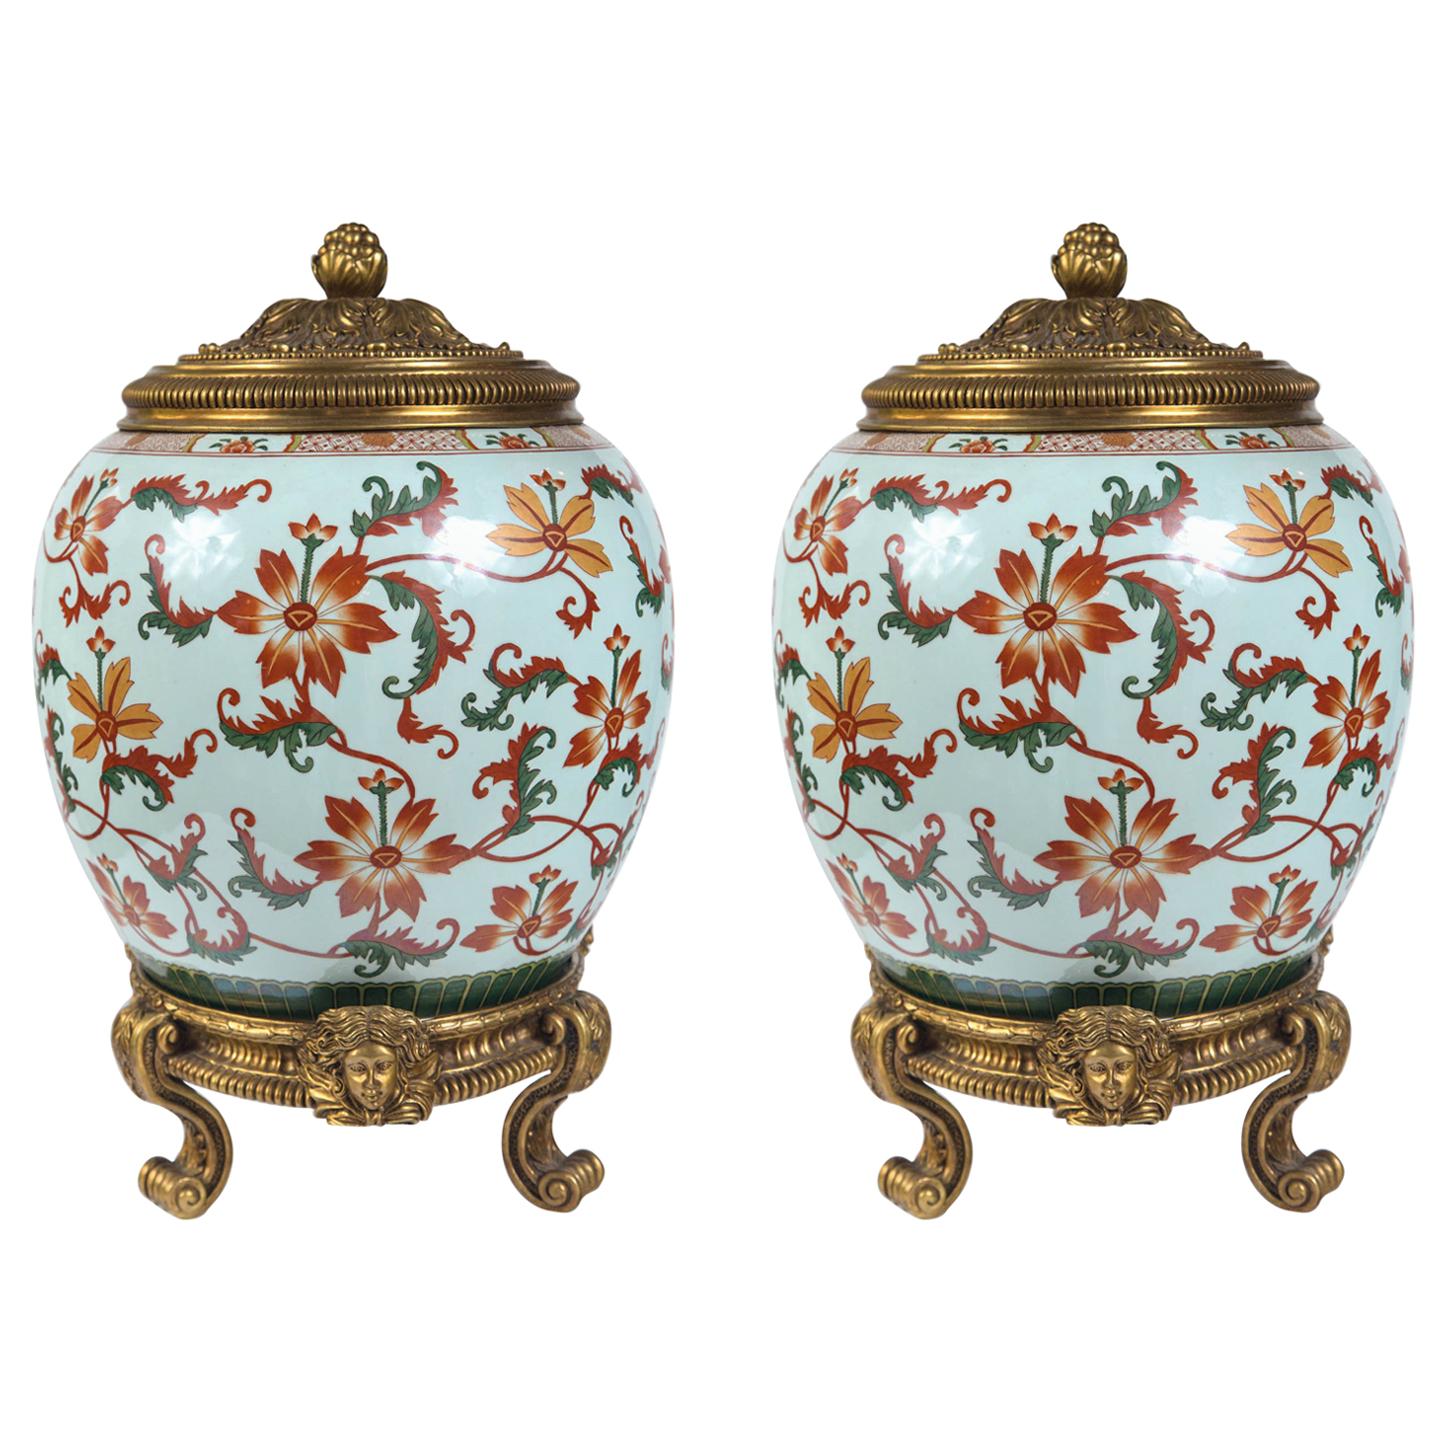 Pair of Chinese Style Porcelain Covered Jars